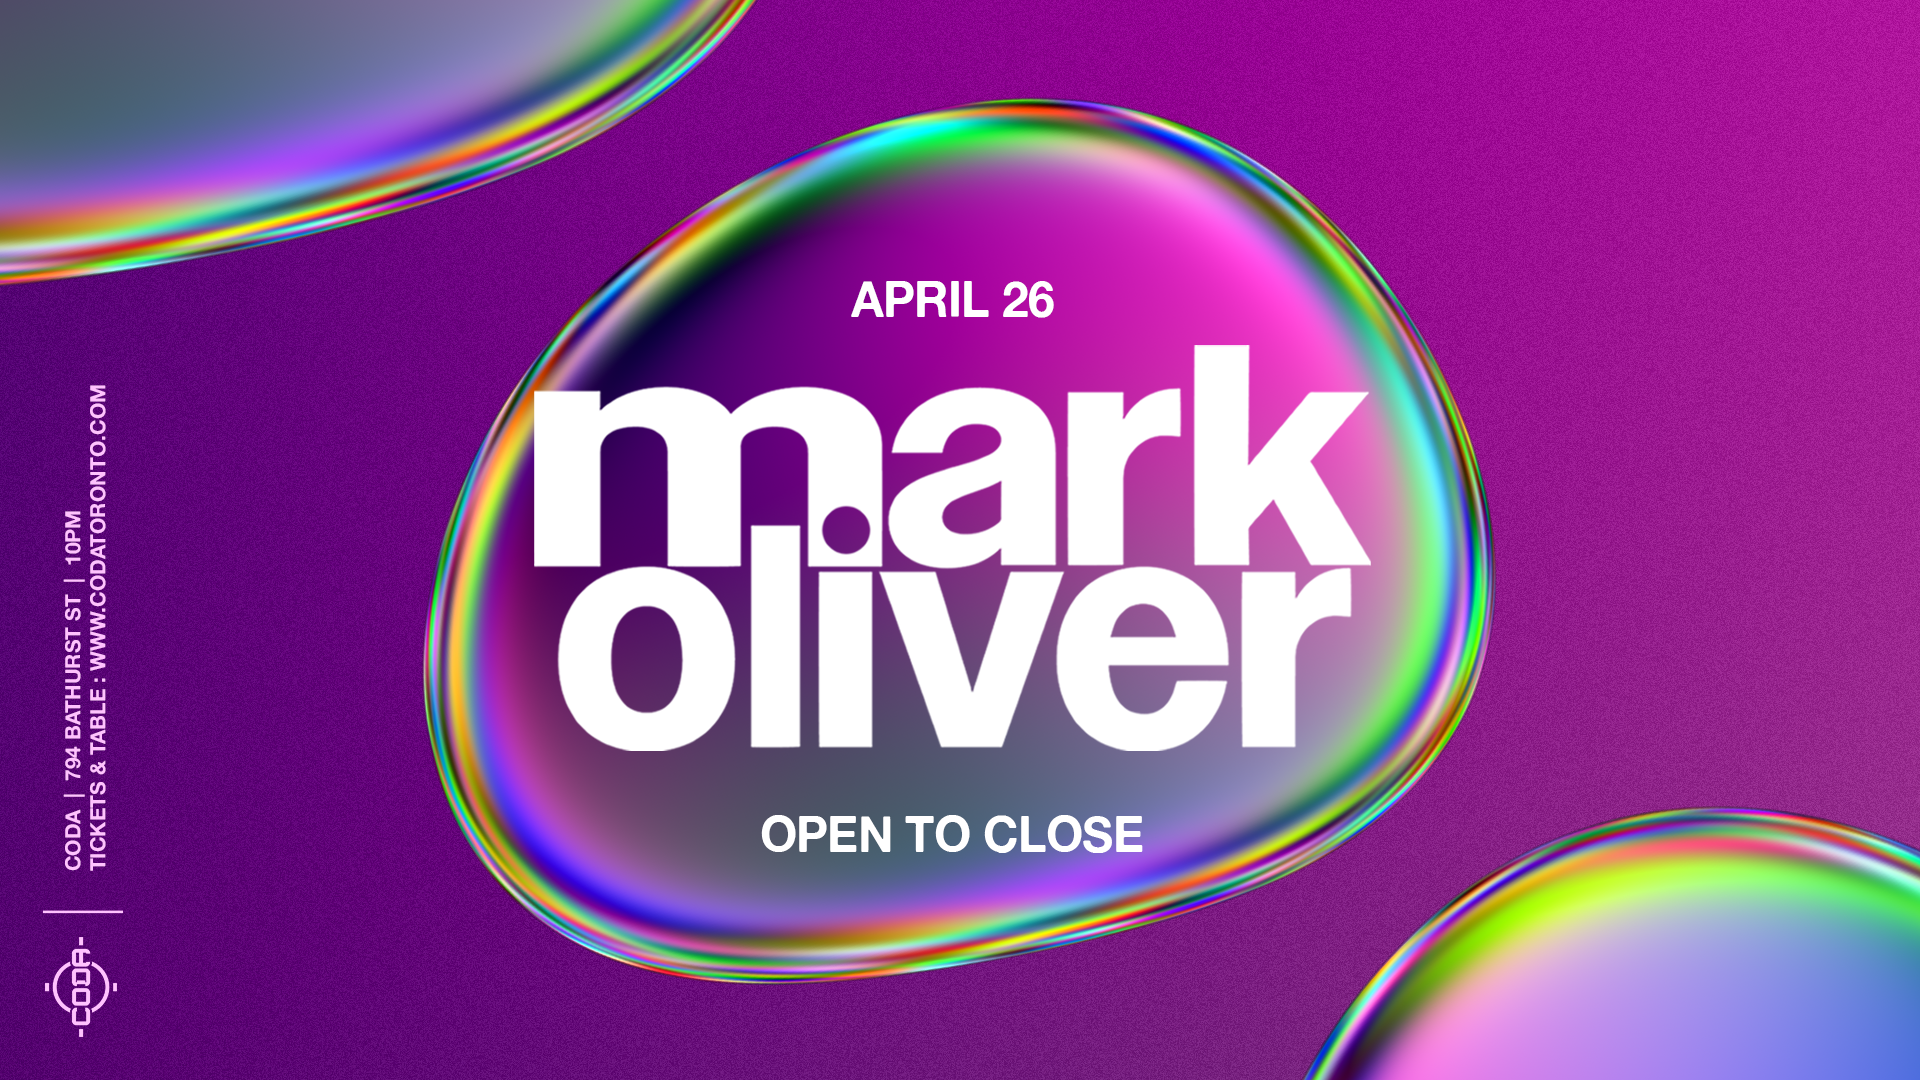 Mark Oliver - Open To Close - Página frontal